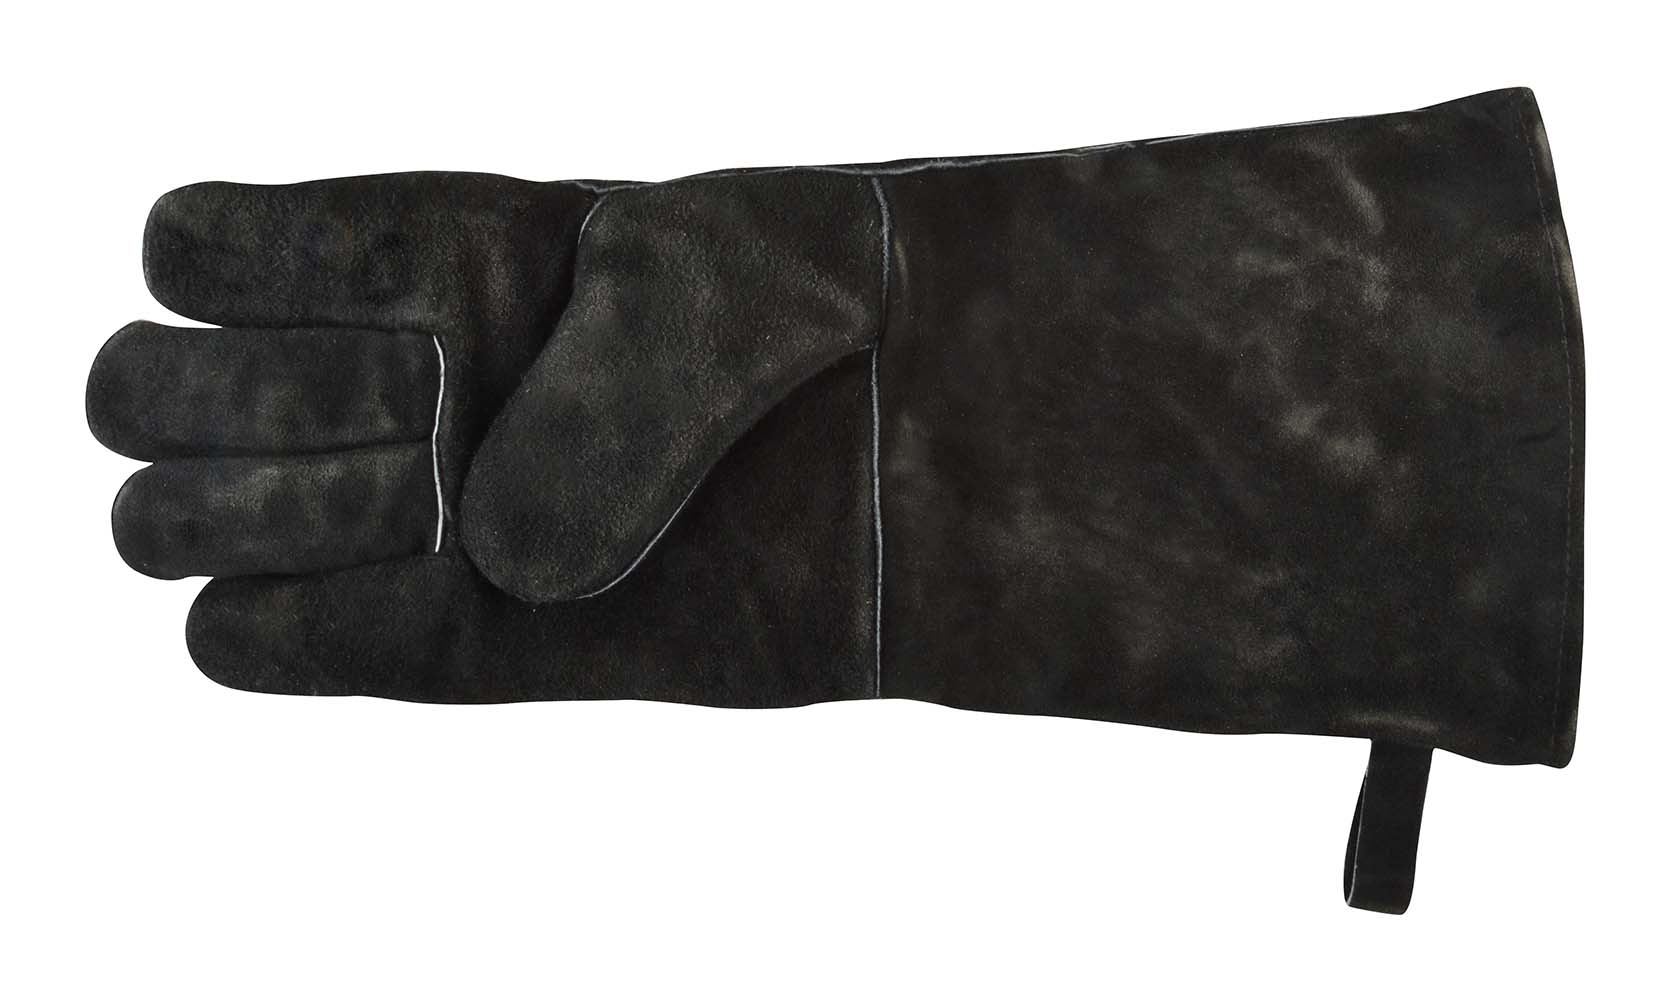 8192580 A leather barbecue glove. Make sure to never be bothered by the heat when adding wood or coal to a fire. The extra long sleeve will protect the hand and forearm against the high temperatures of a fireplace, barbecue, oven and campfire. Made of flame-retardant material and provides heat protection up to 100°C. Includes a hanging loop. Conforms to EC Directive 89/686 EEC